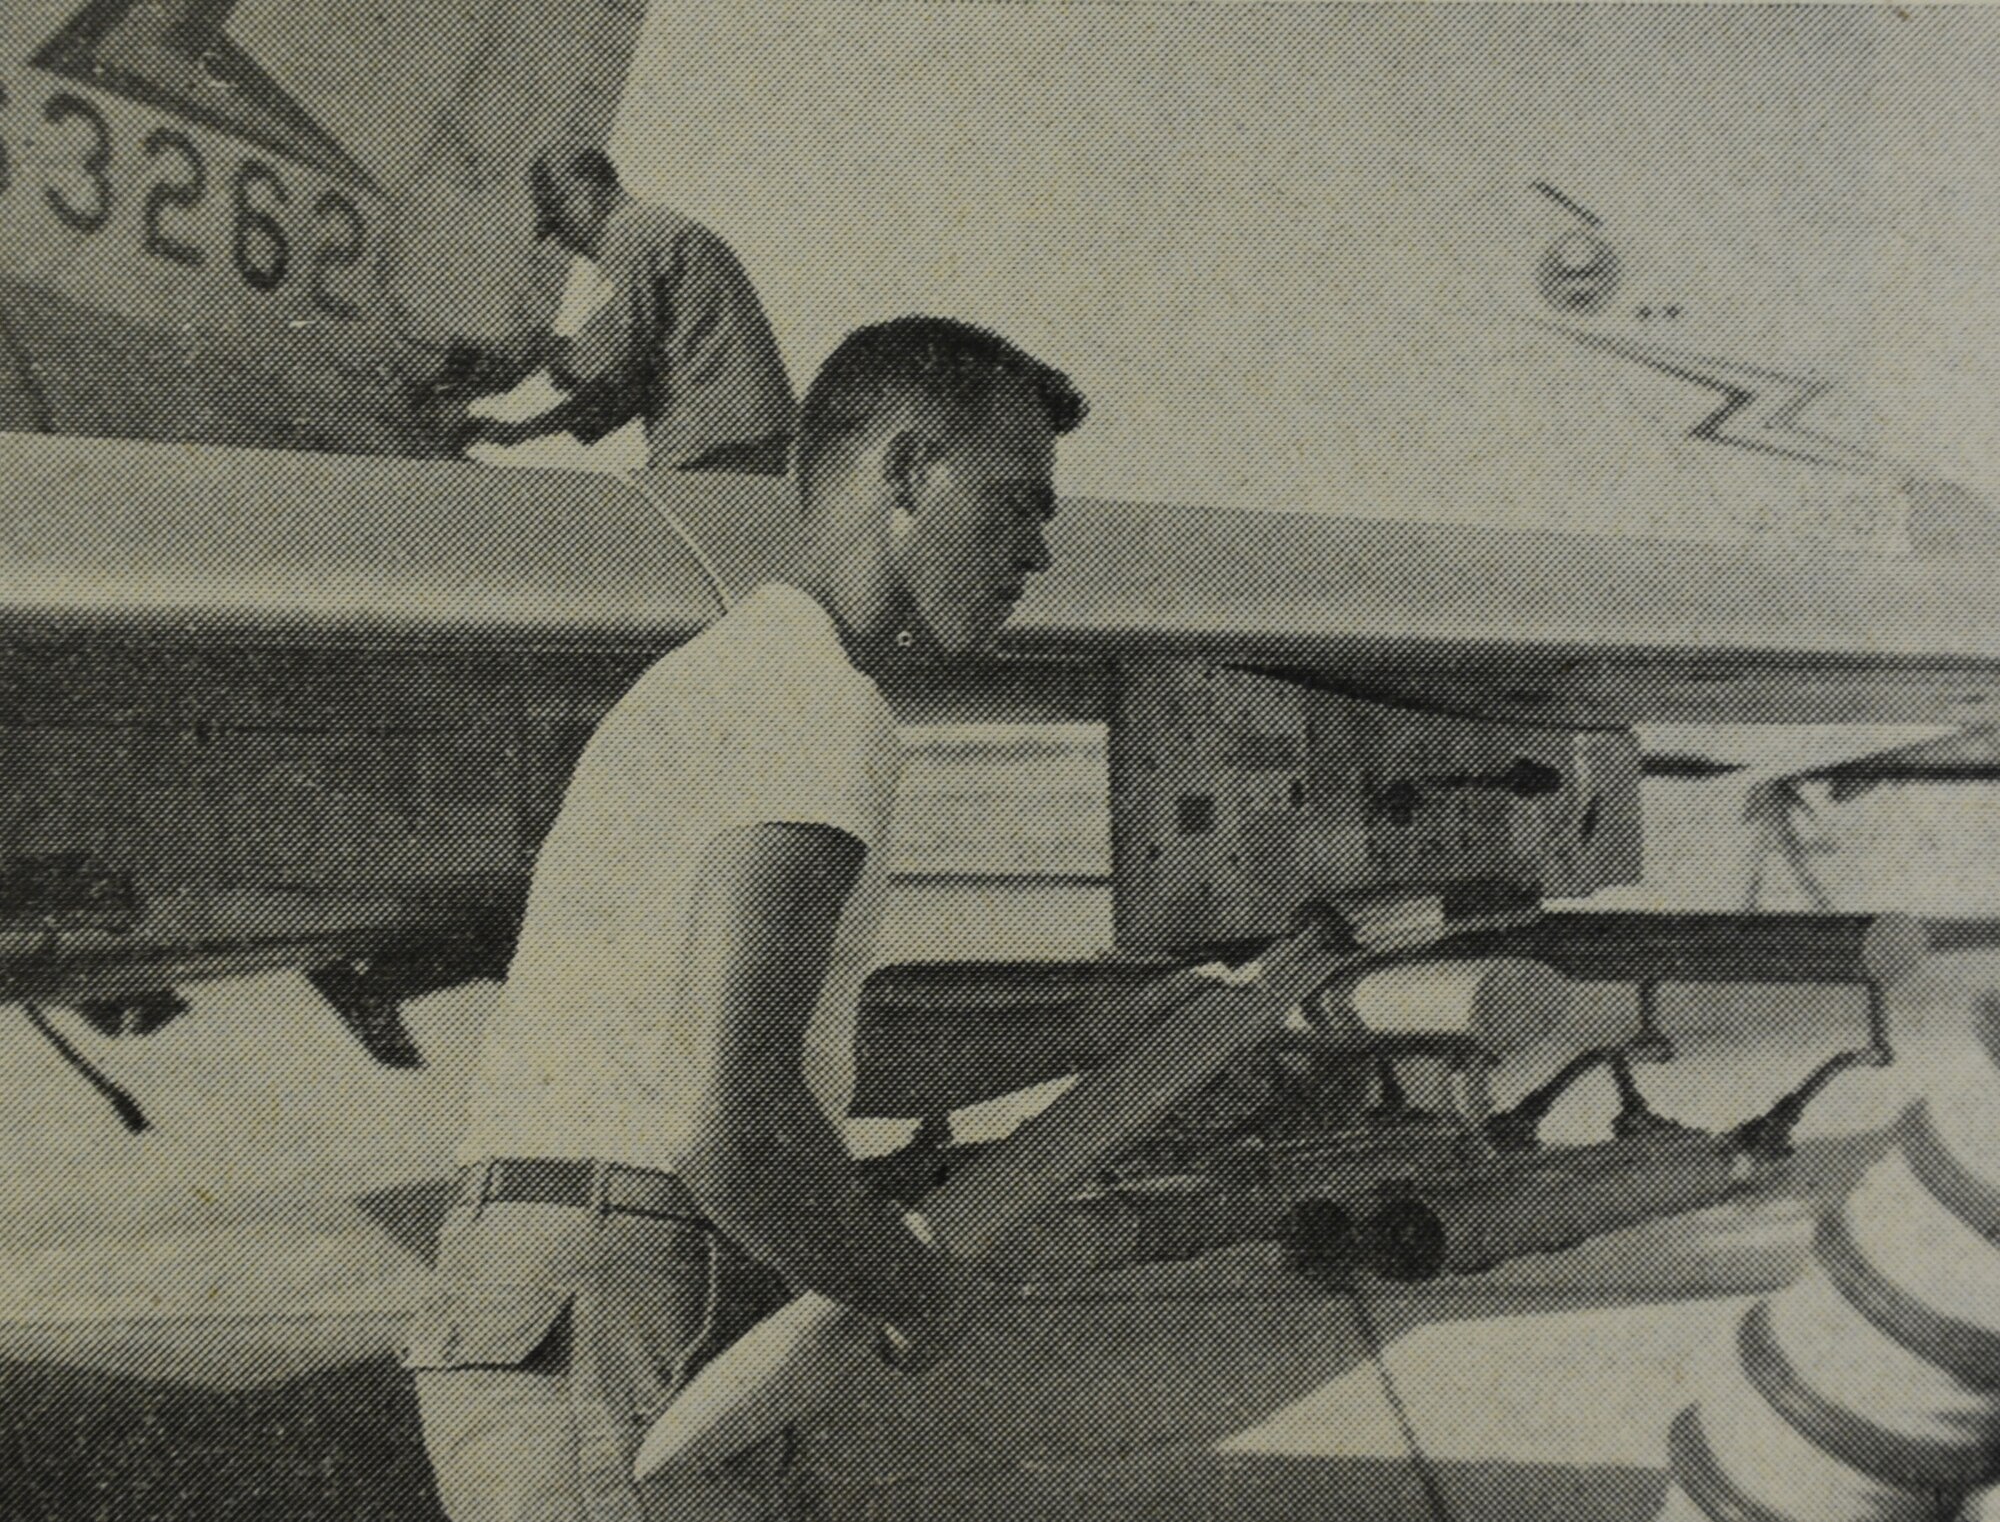 WHEELUS AB, Libya - SSgt. Raliegh Evans, 348th Munitions Maintenance Squadron, loads a rocket into the pod of an F-100 aircraft preparing for a mission over El Uotia range.